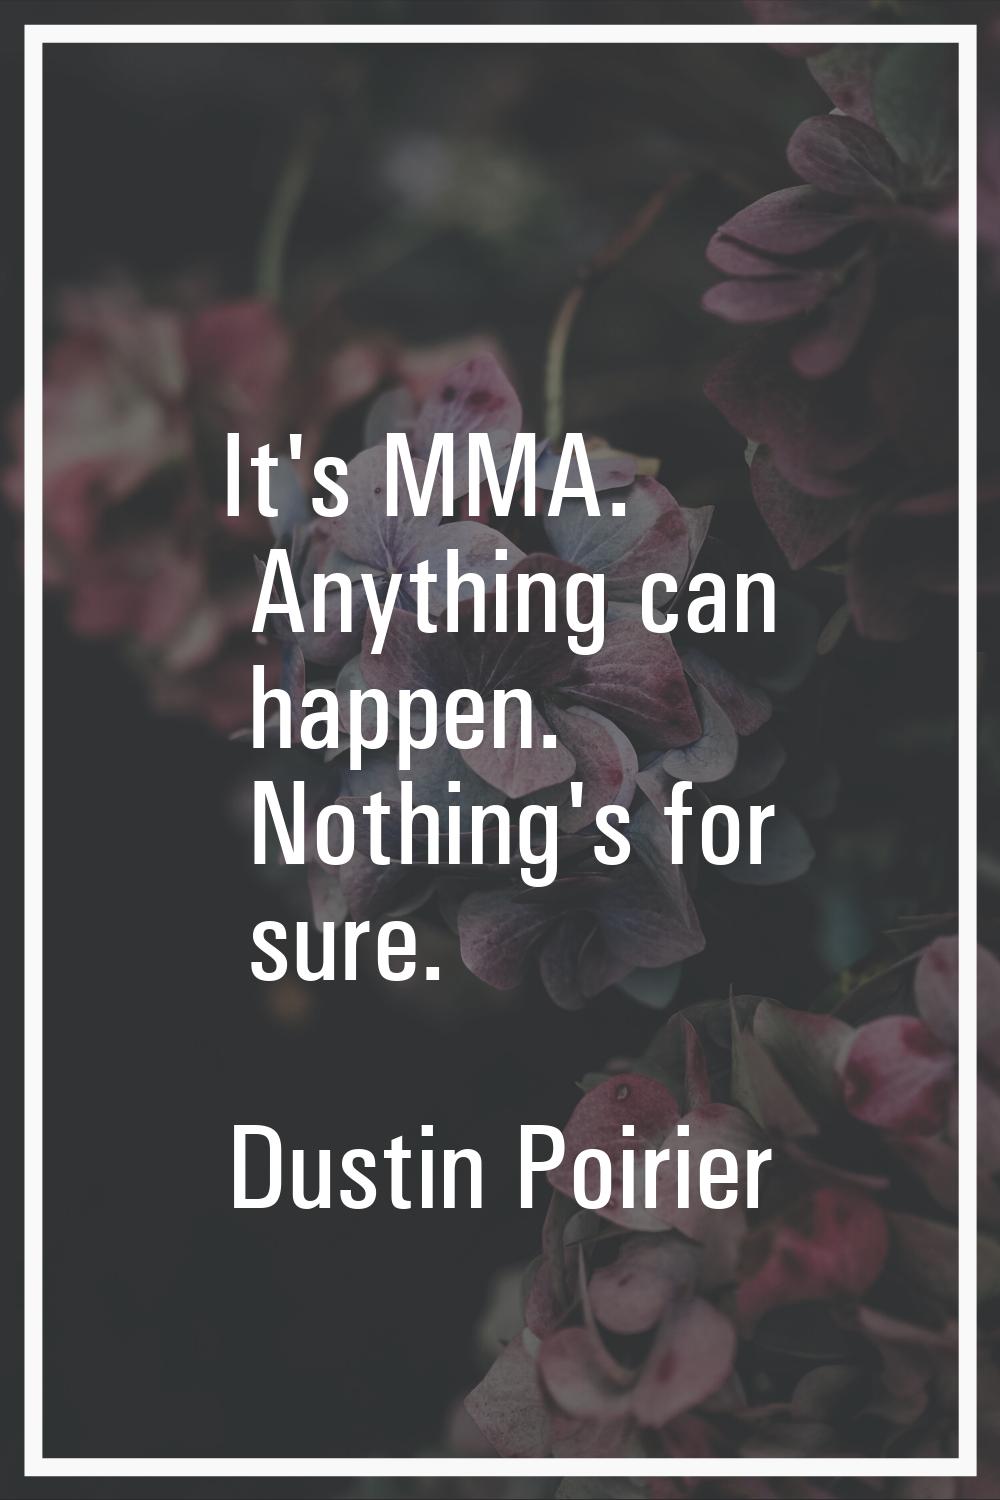 It's MMA. Anything can happen. Nothing's for sure.